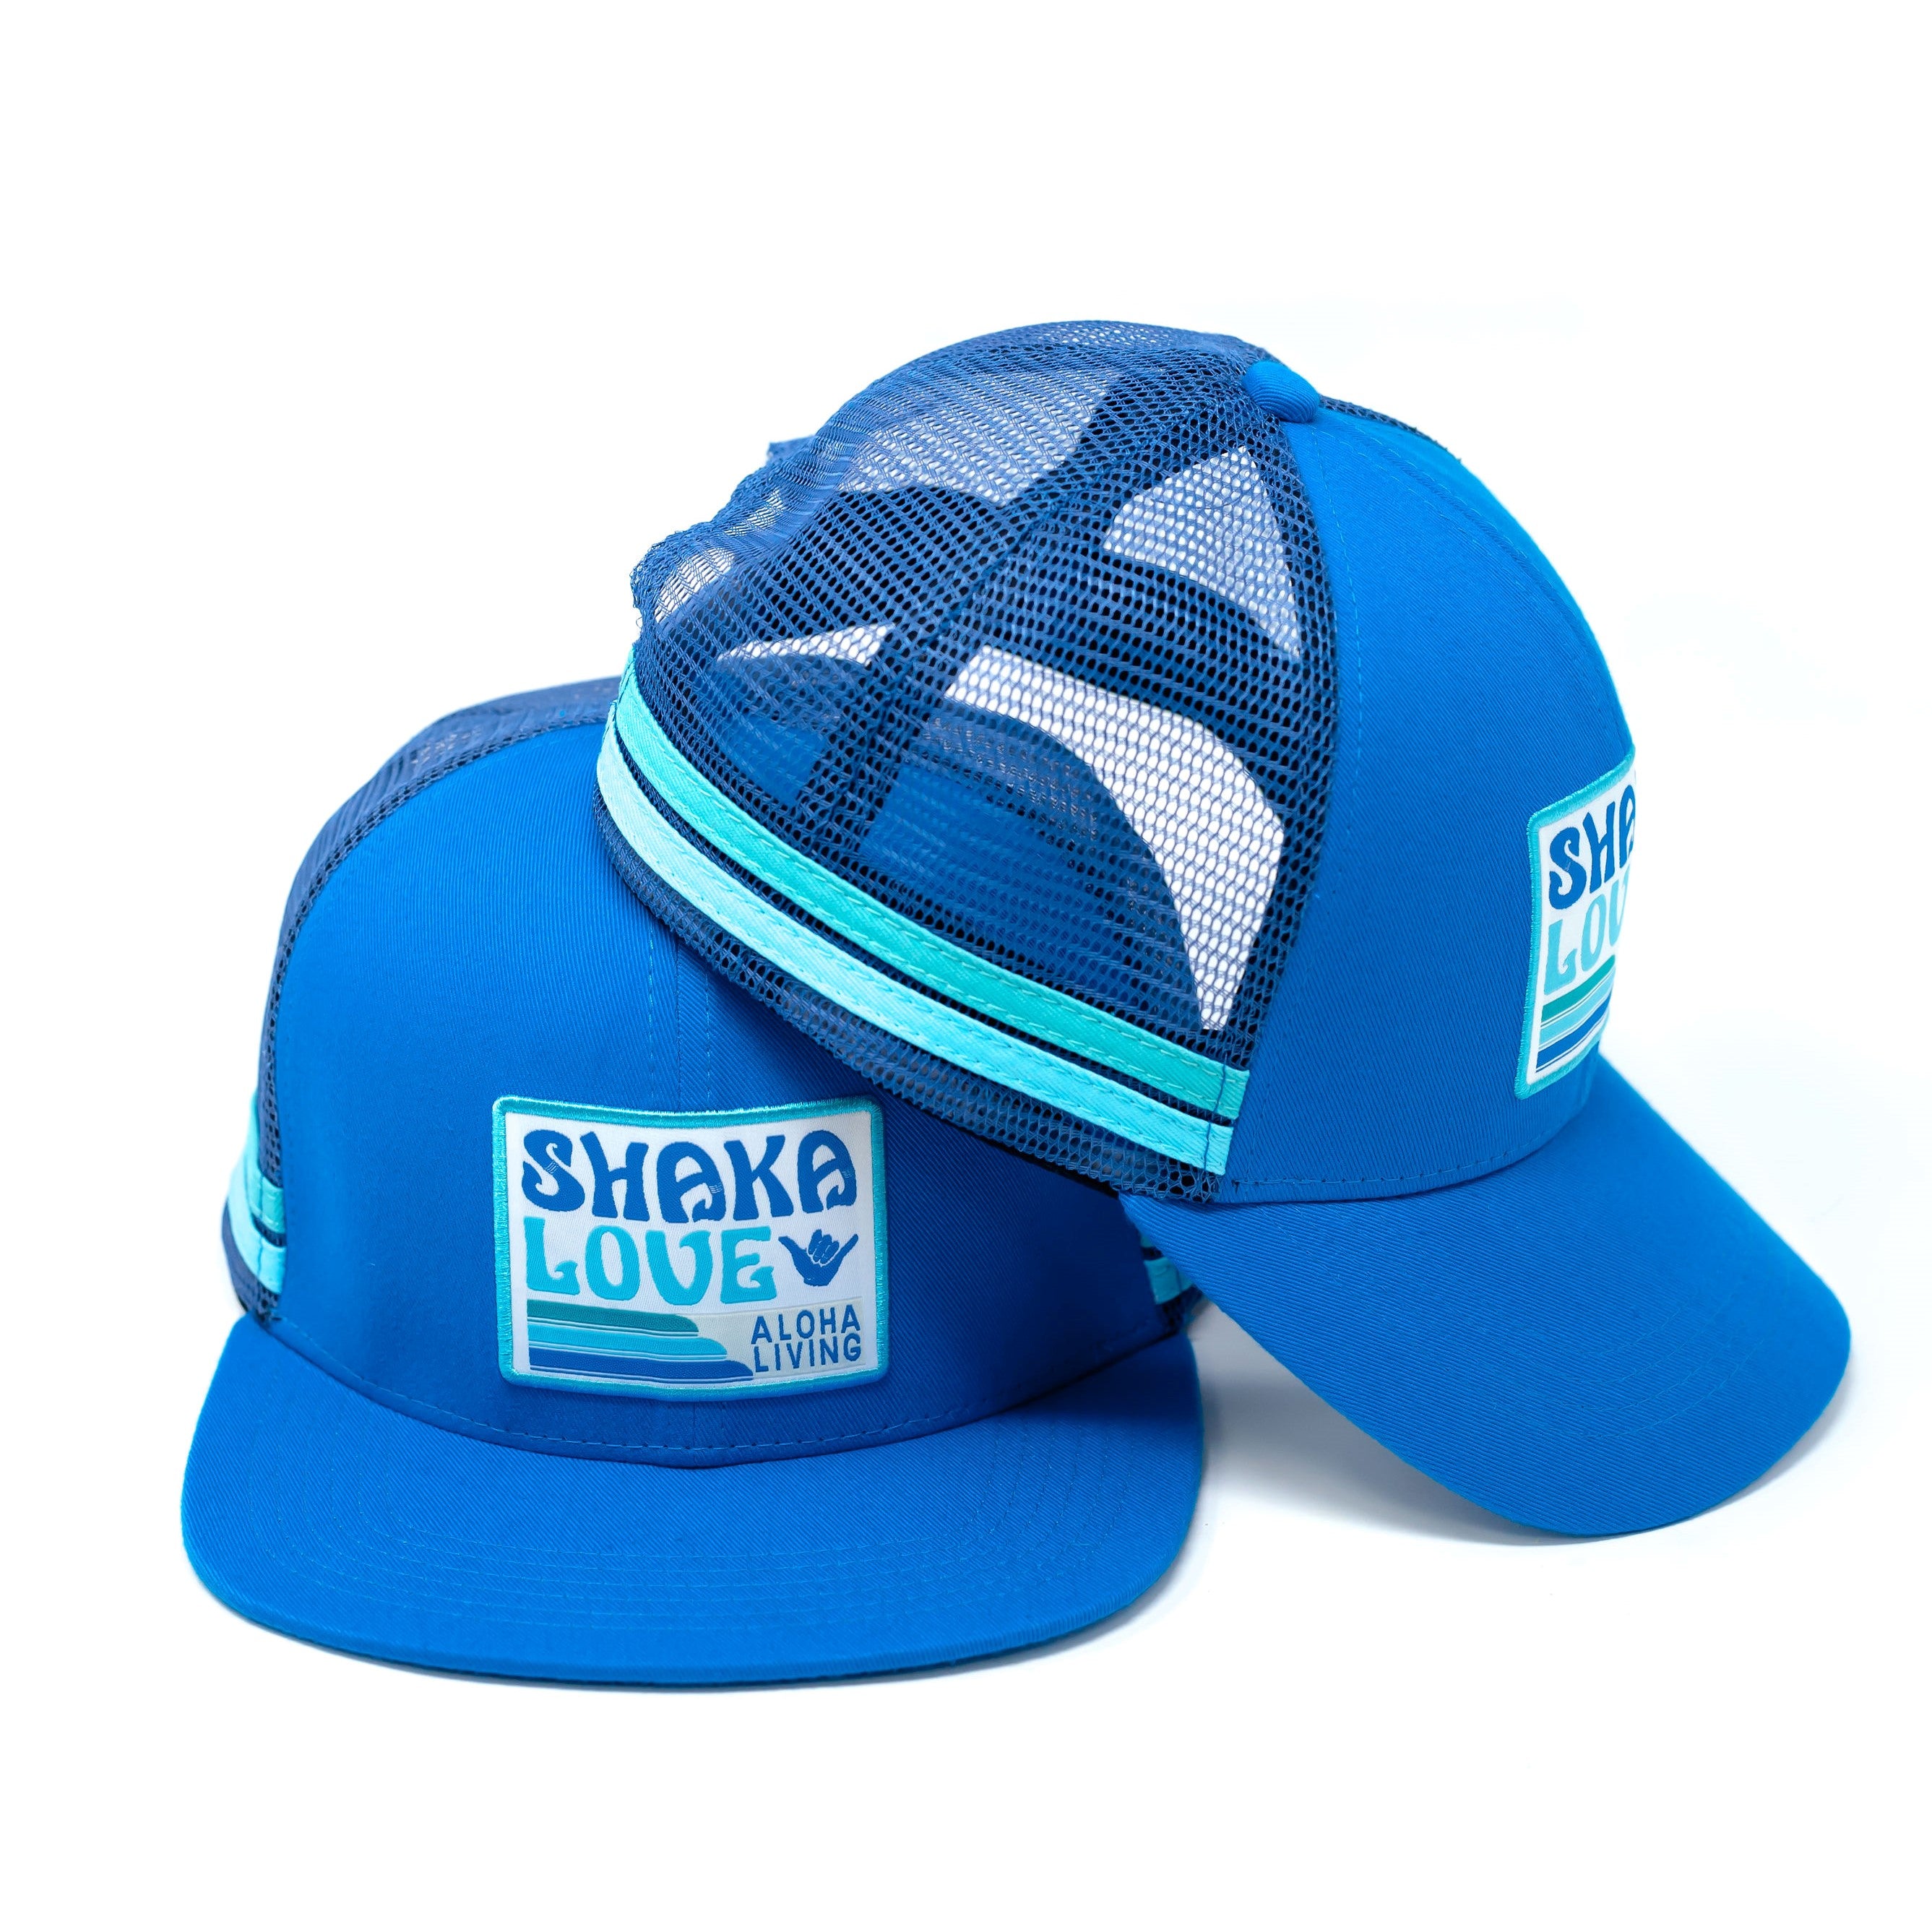 Bundle #5: Includes 2 Eco Surf Hats of Your Choice